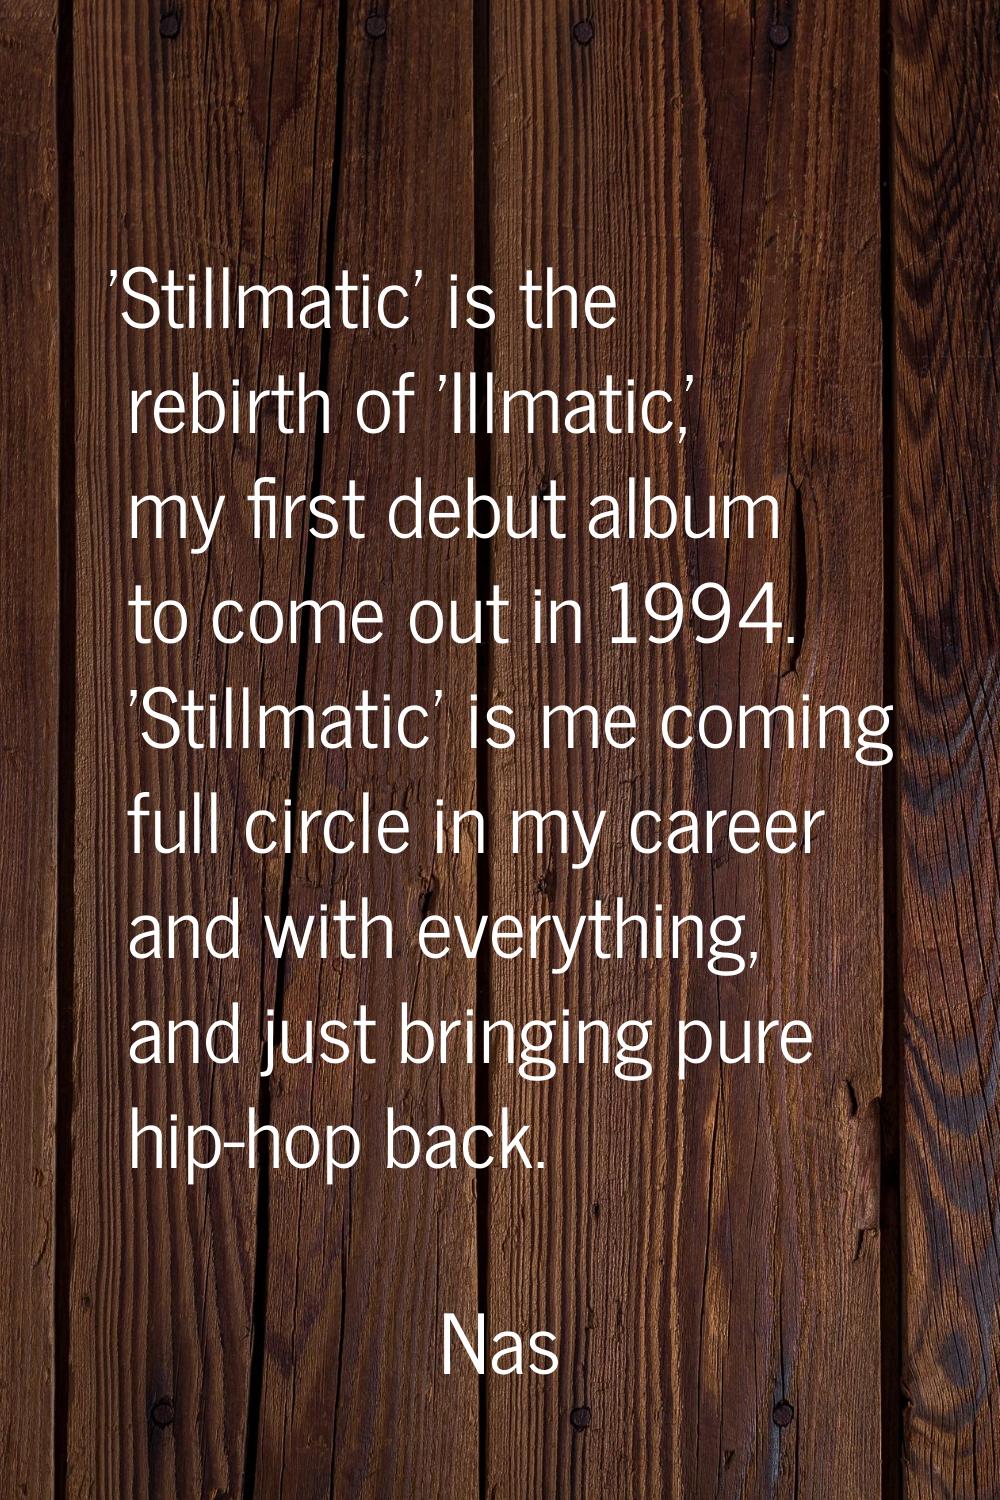 'Stillmatic' is the rebirth of 'Illmatic,' my first debut album to come out in 1994. 'Stillmatic' i